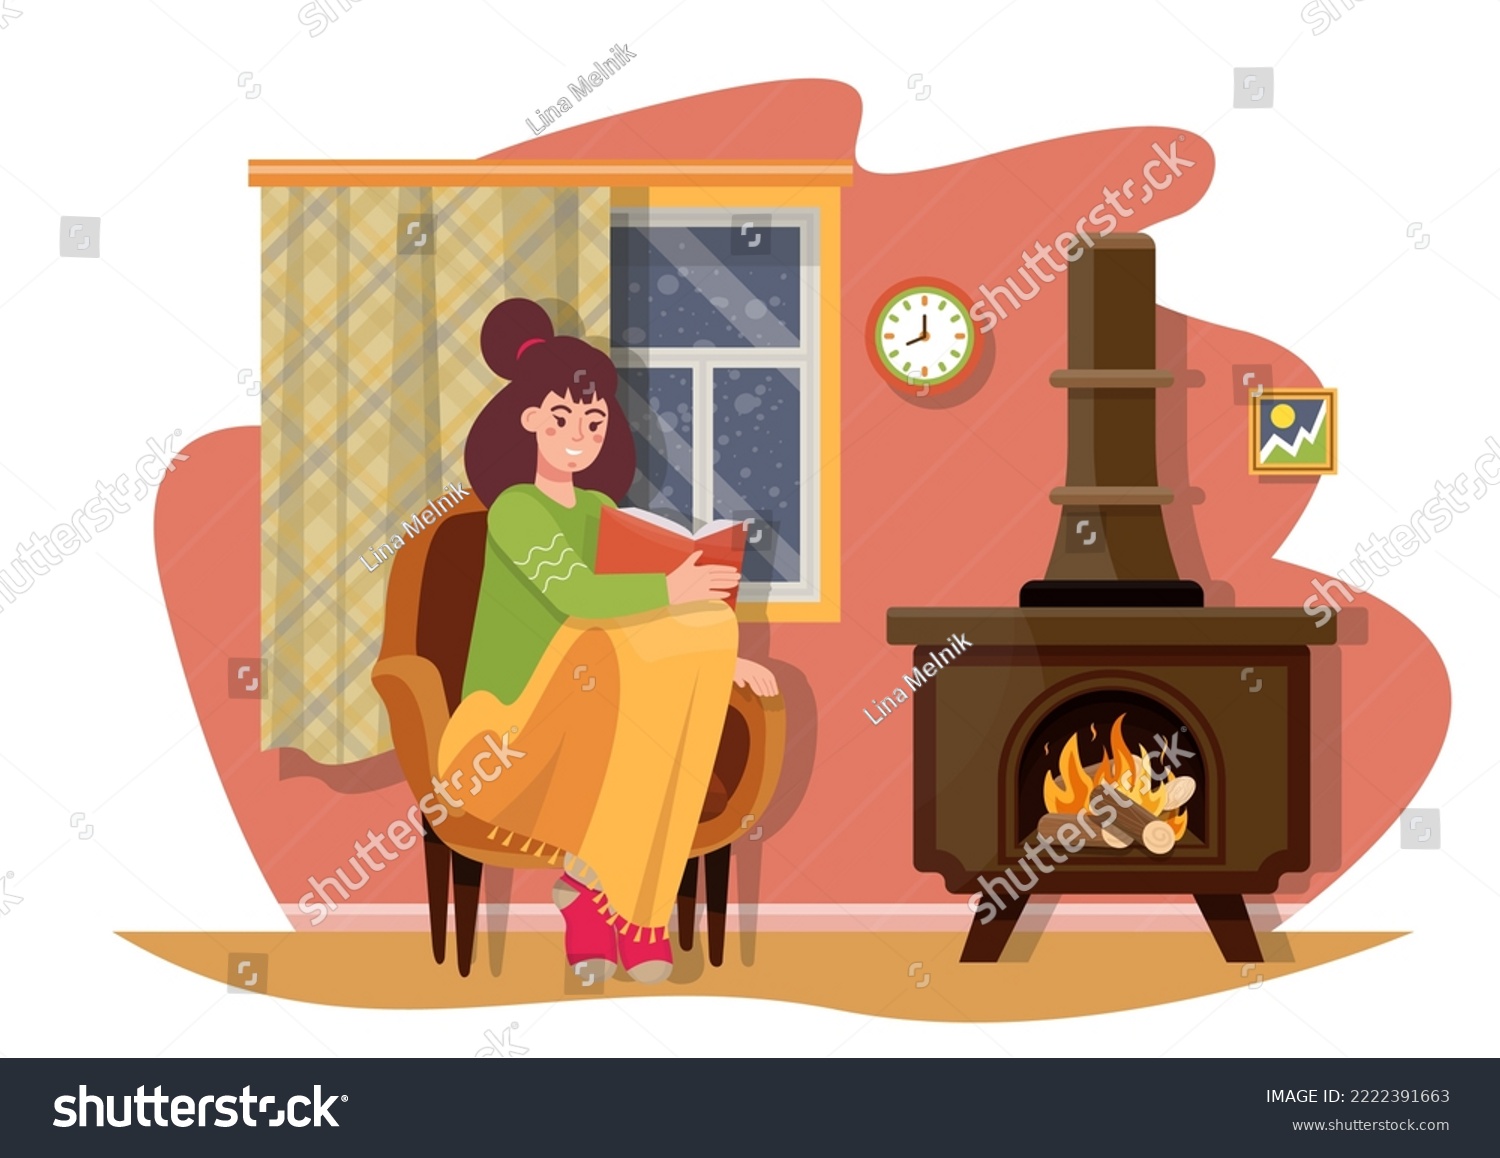 SVG of Woman sitting in the armchair covered in blanket and reading a book near potbelly stove with burning wood. Freezing at home. Warming the room with a heater in cold weather. Flat vector illustration. svg